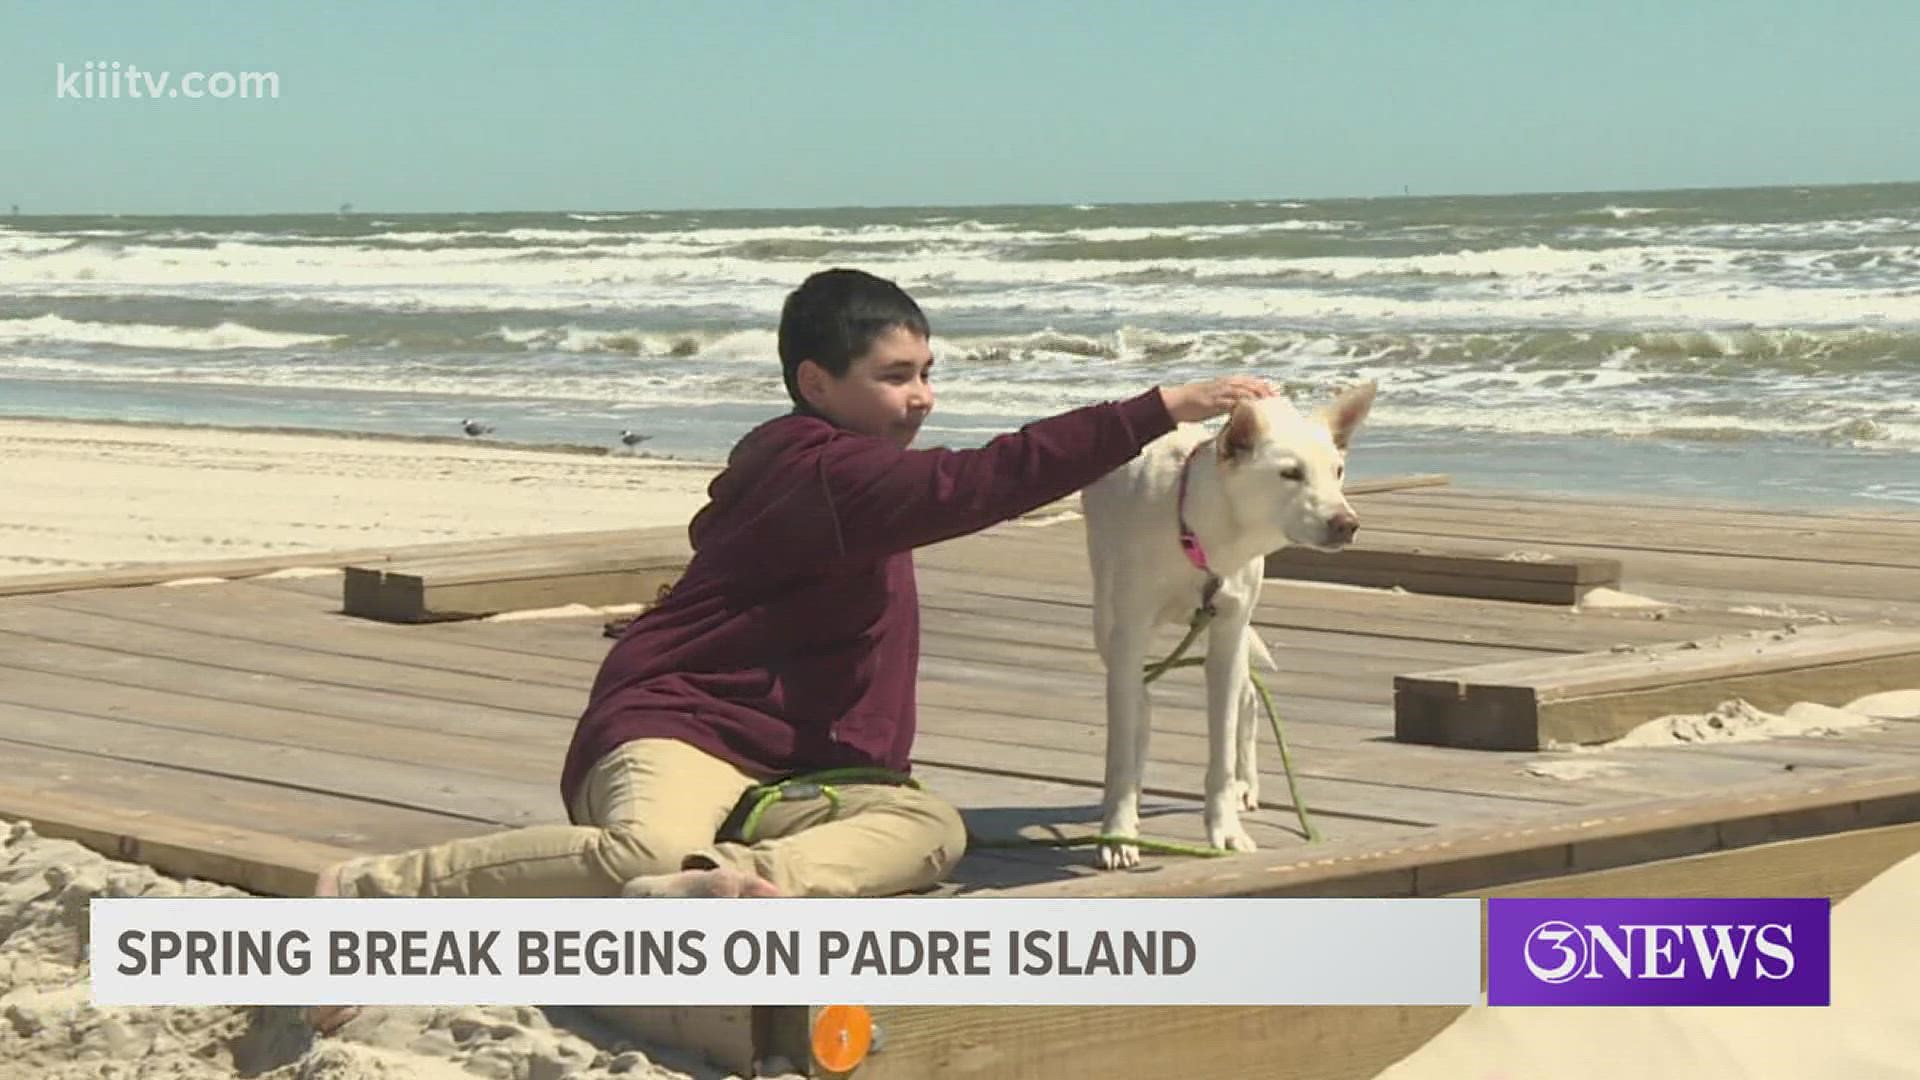 Spring Break is back in Corpus Christi and while temperatures are low, spirits are high.